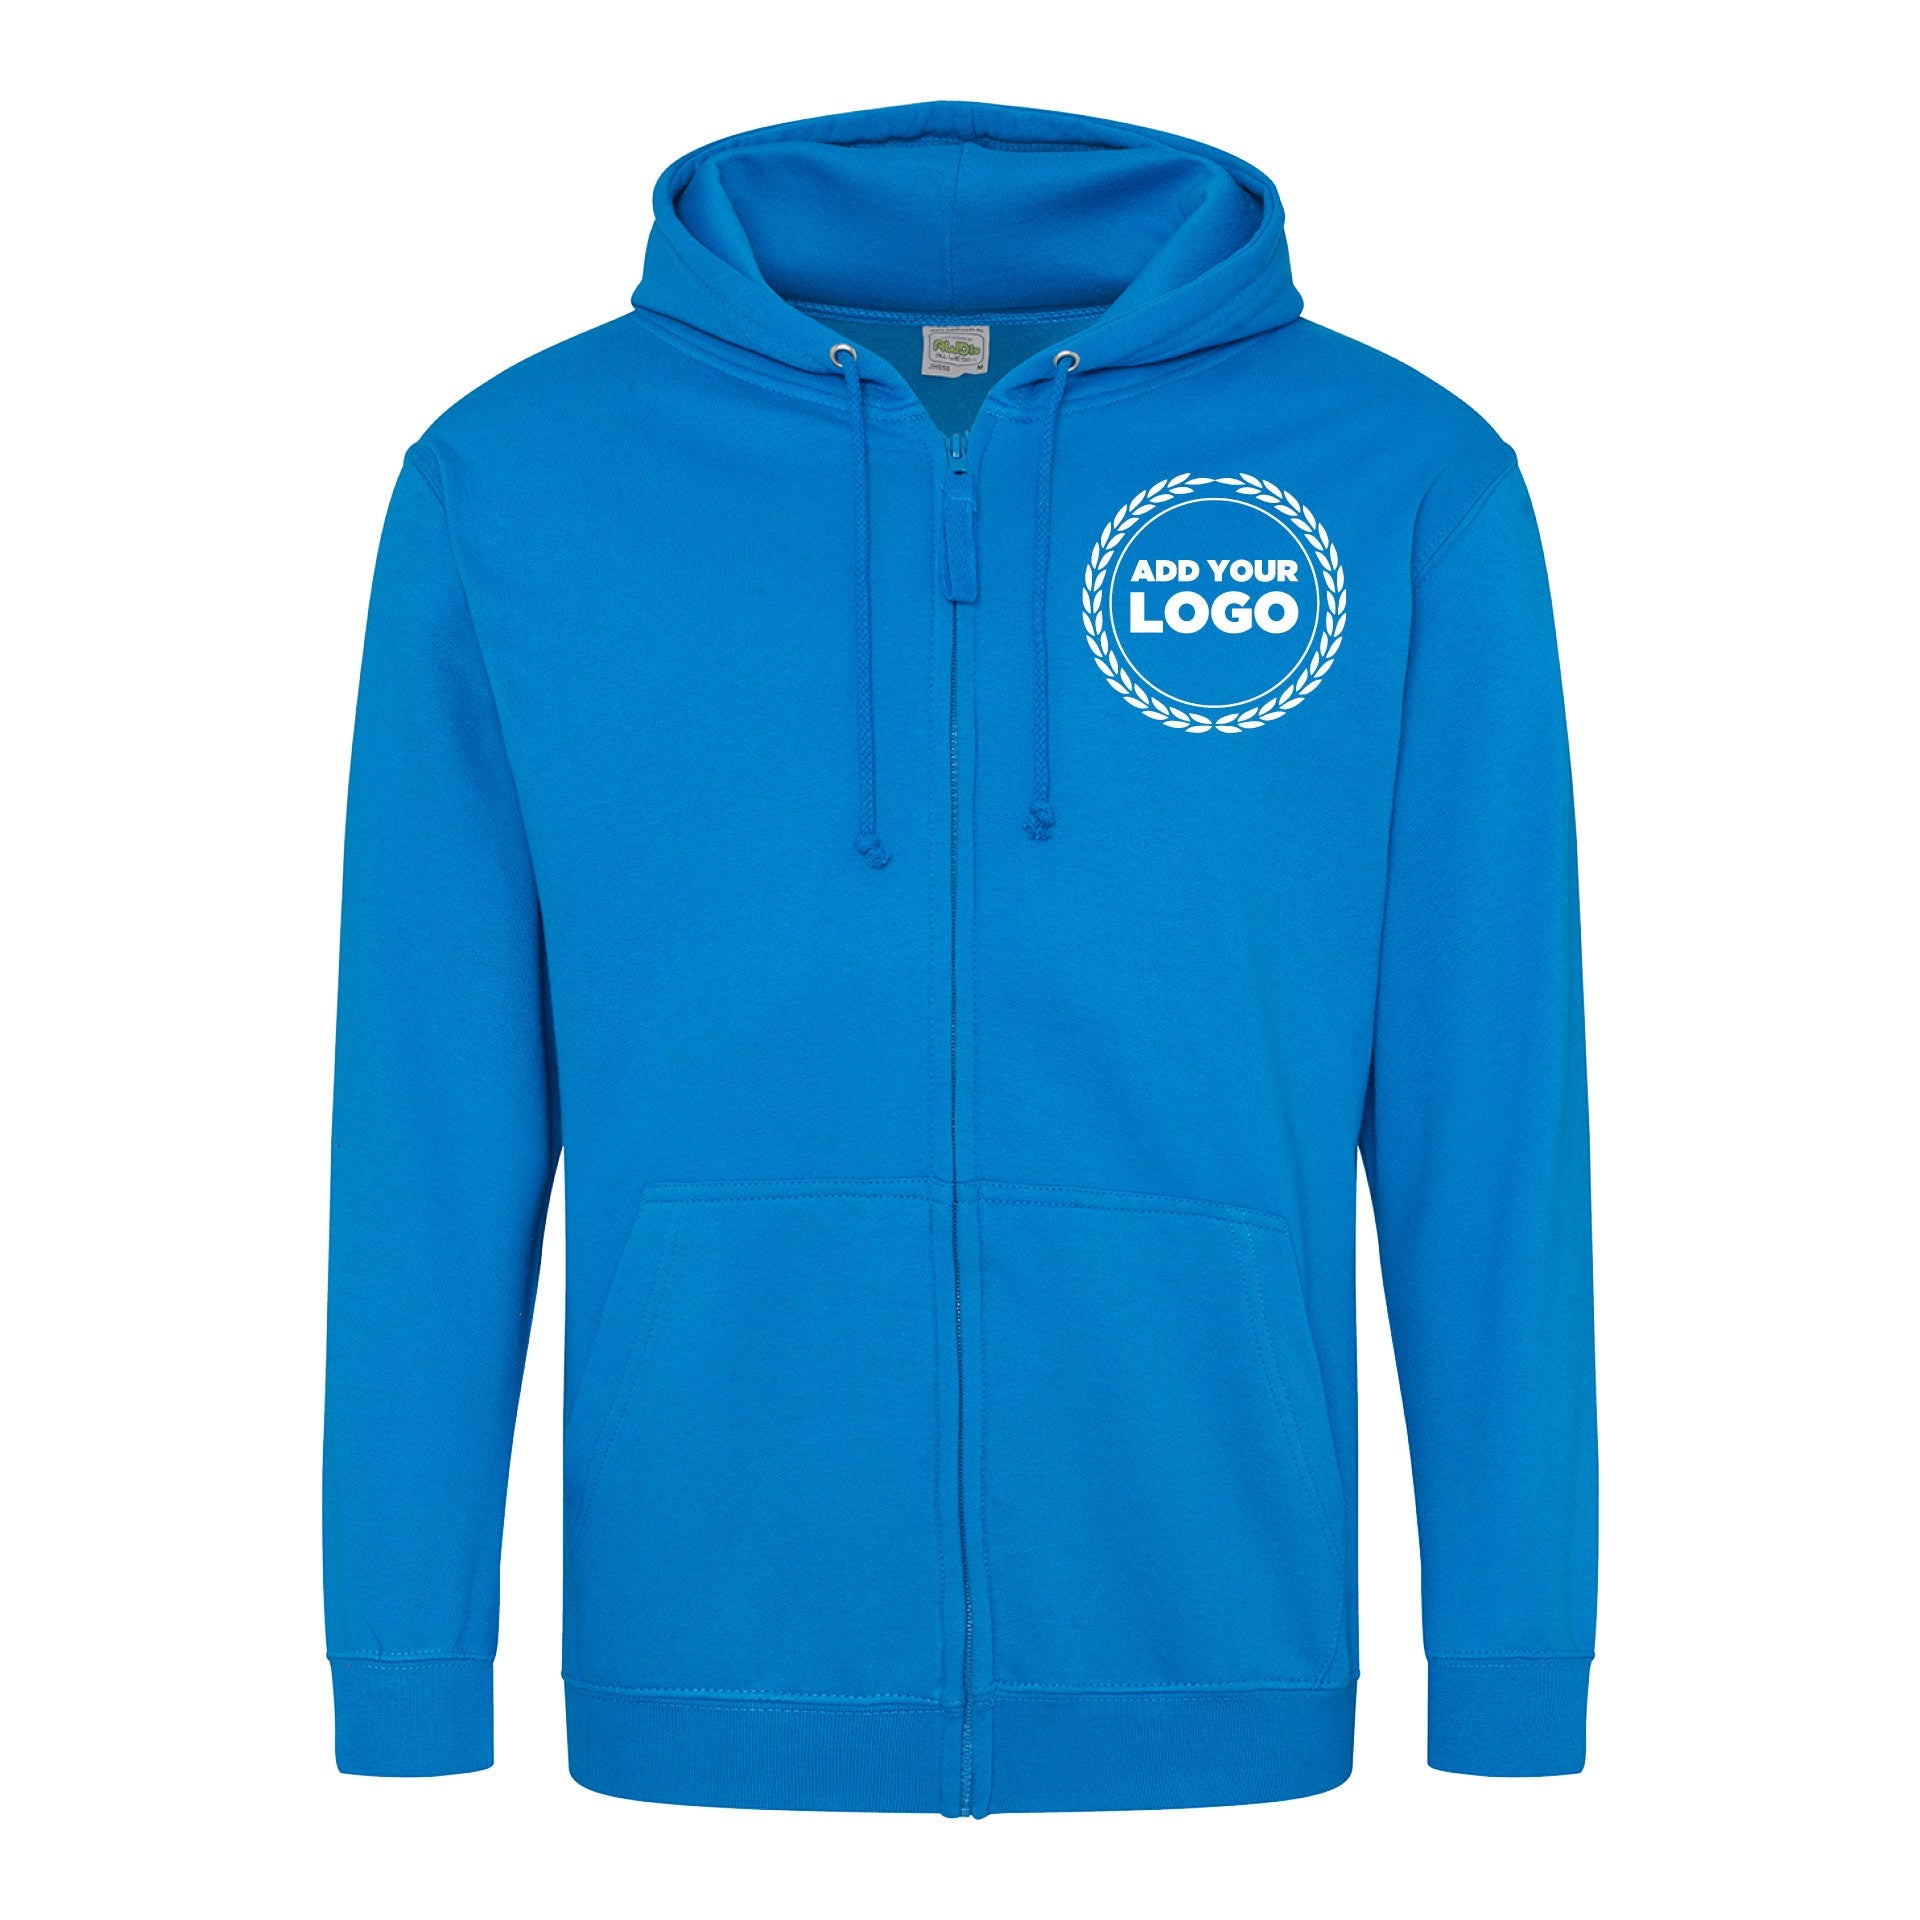 ZIPPED HOODIE - LARGER SIZES